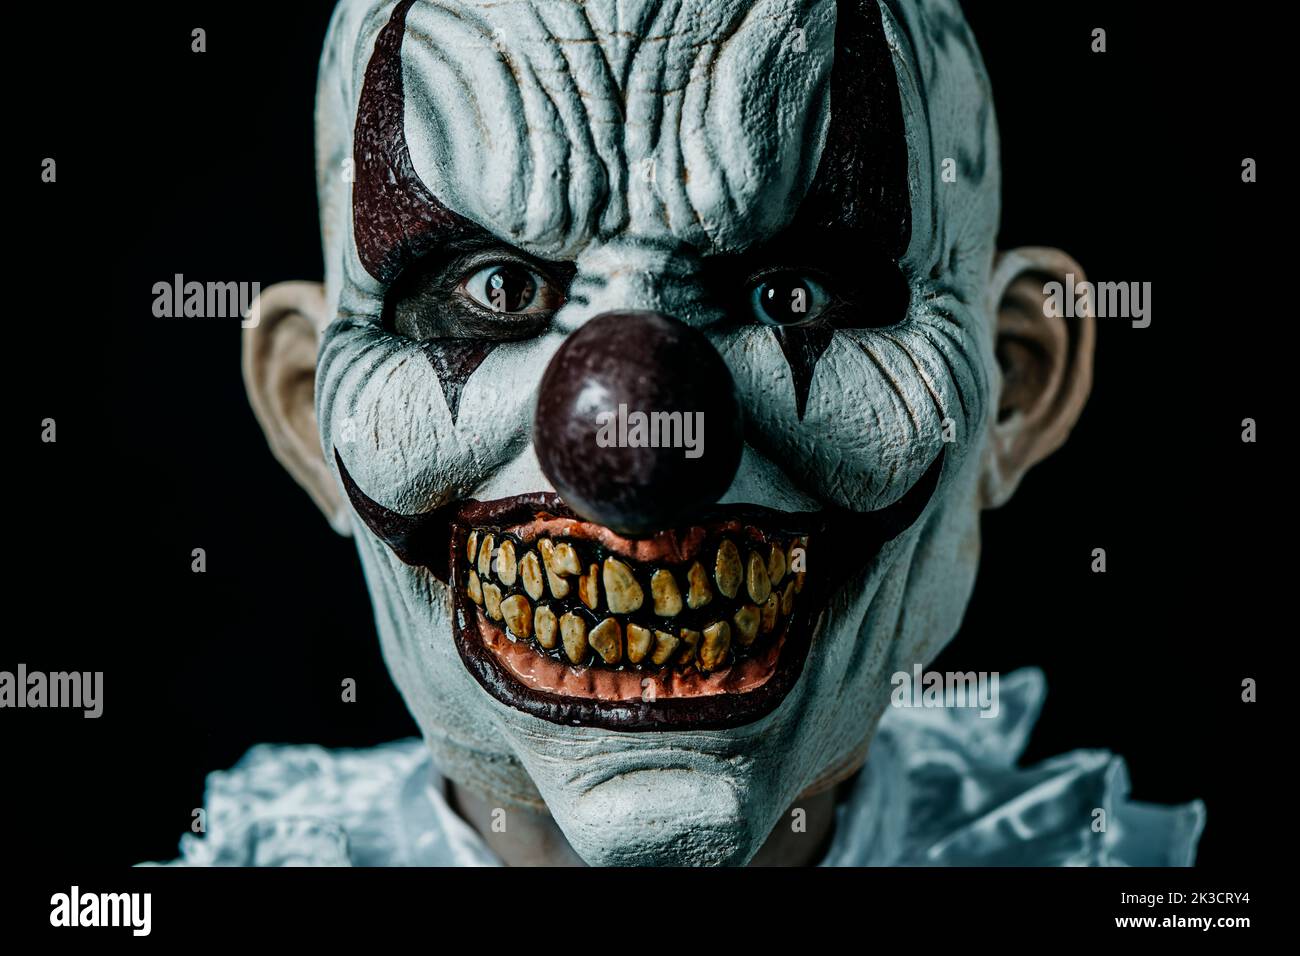 closeup of a creepy bald evil clown staring at the observer, against a black background Stock Photo